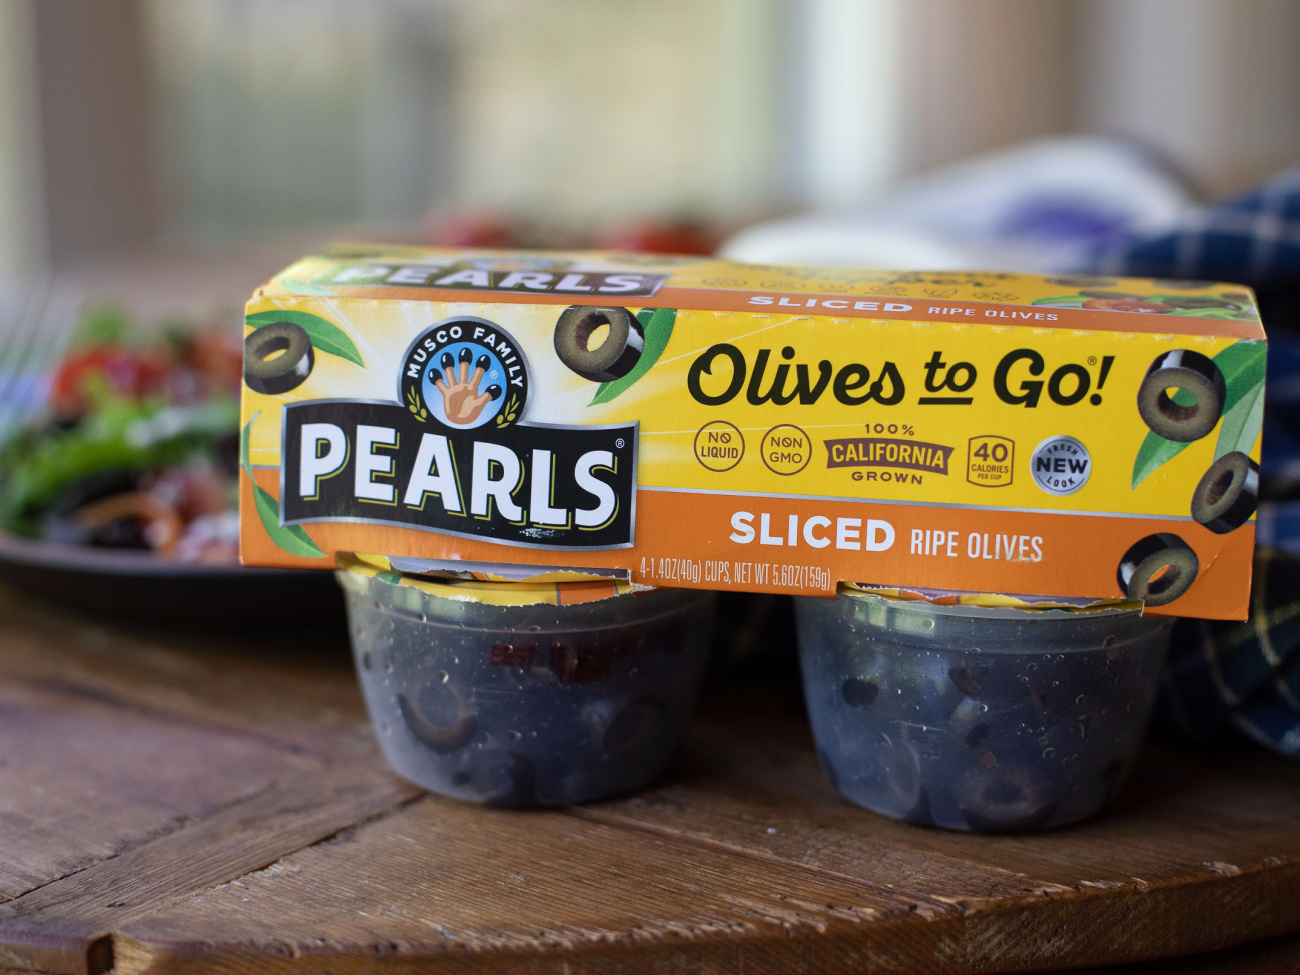 Pearls Olives To Go! 4-Pack Just $1.34 At Publix